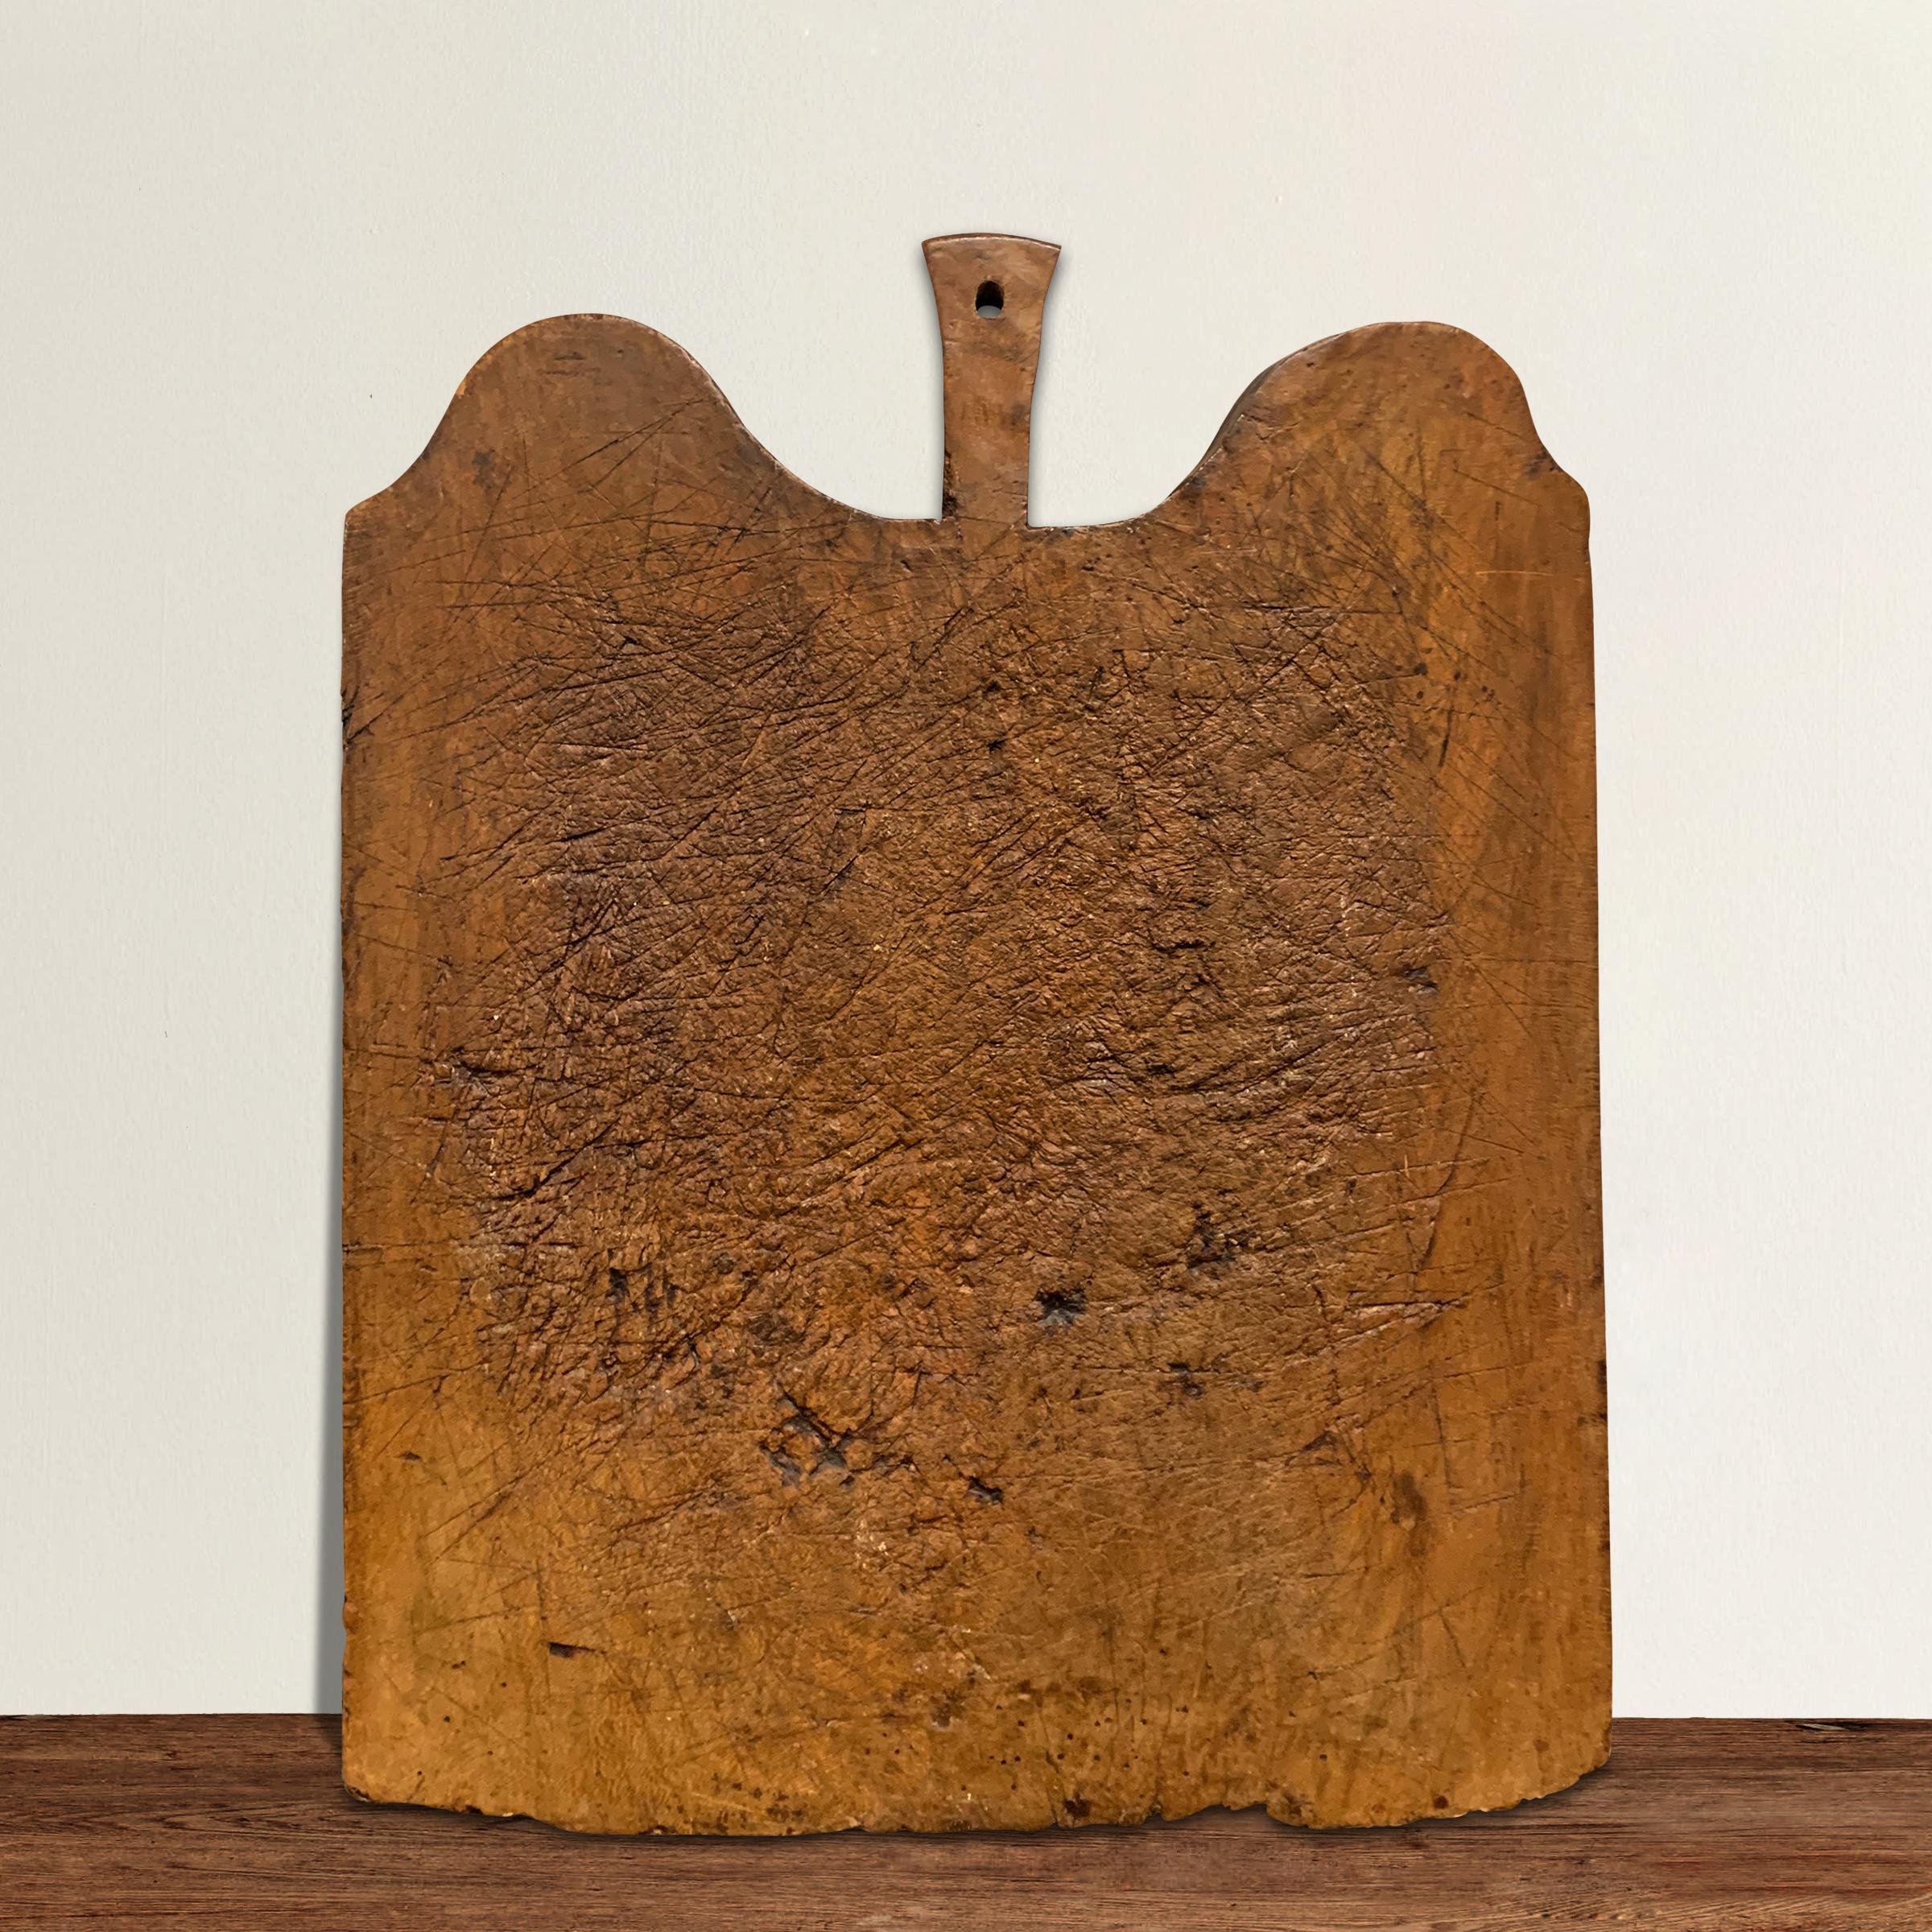 A rather large 19th century French cutting board with a wonderfully sculptural form and hundred, if not thousands, of knife marks from a century of use. There’s a slight warp to the board, but we think it adds to the charm and personality of the